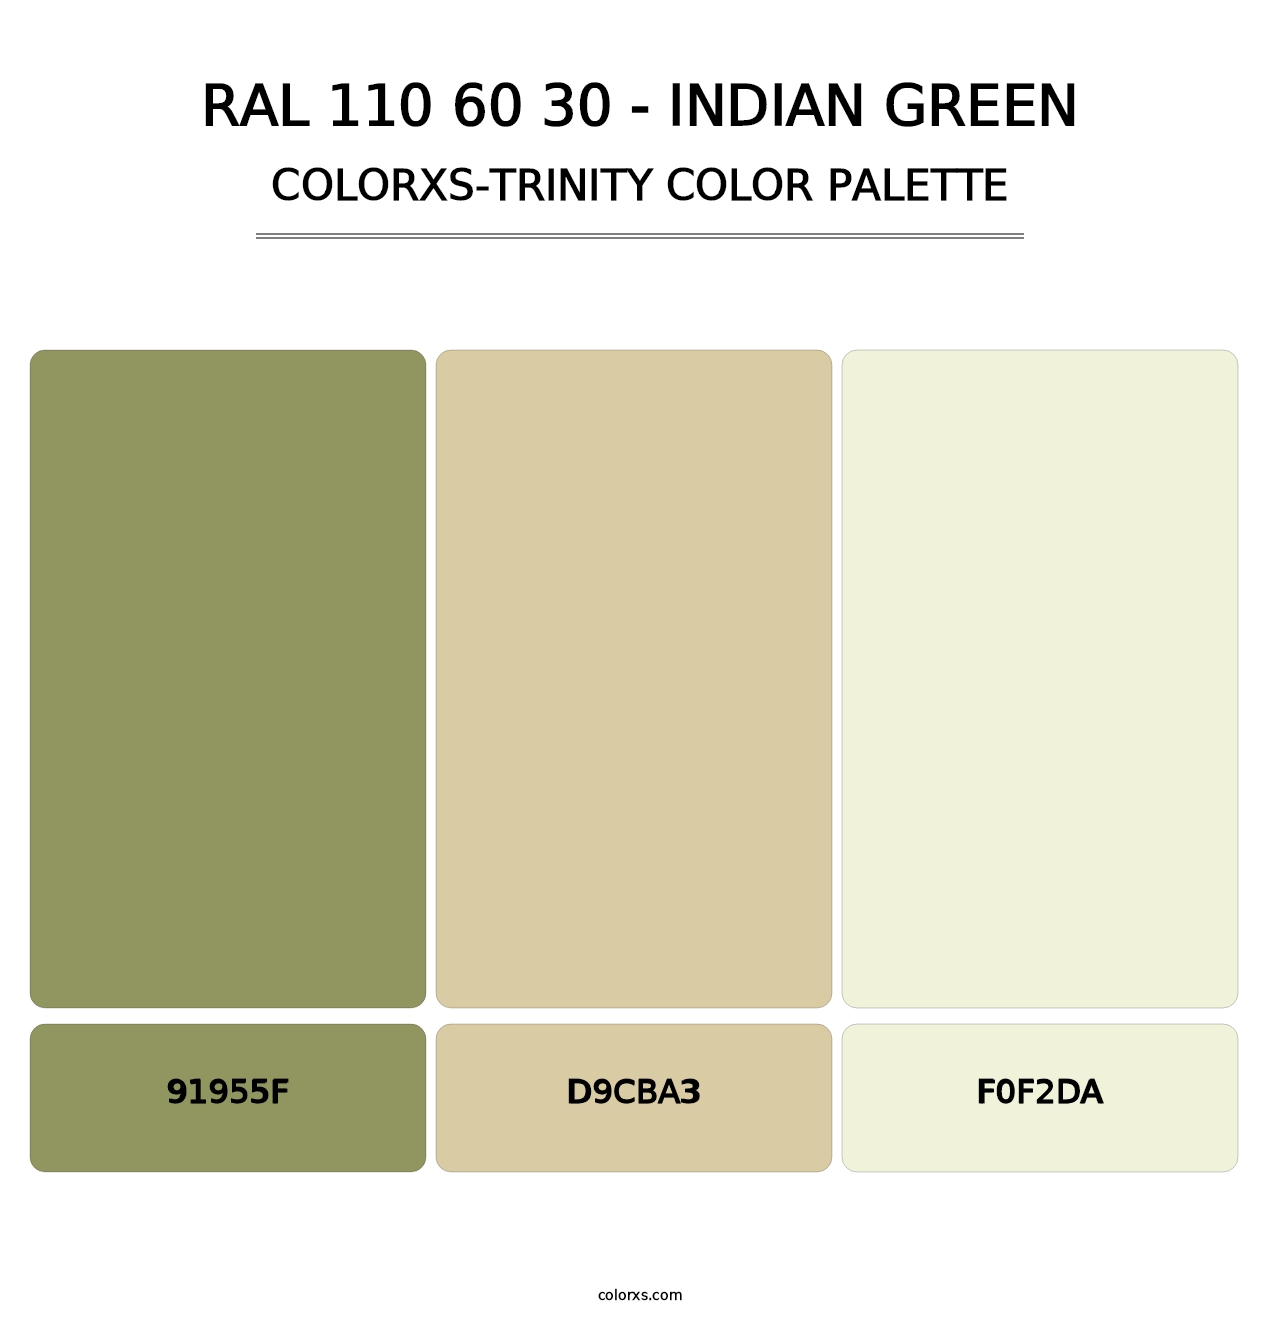 RAL 110 60 30 - Indian Green - Colorxs Trinity Palette